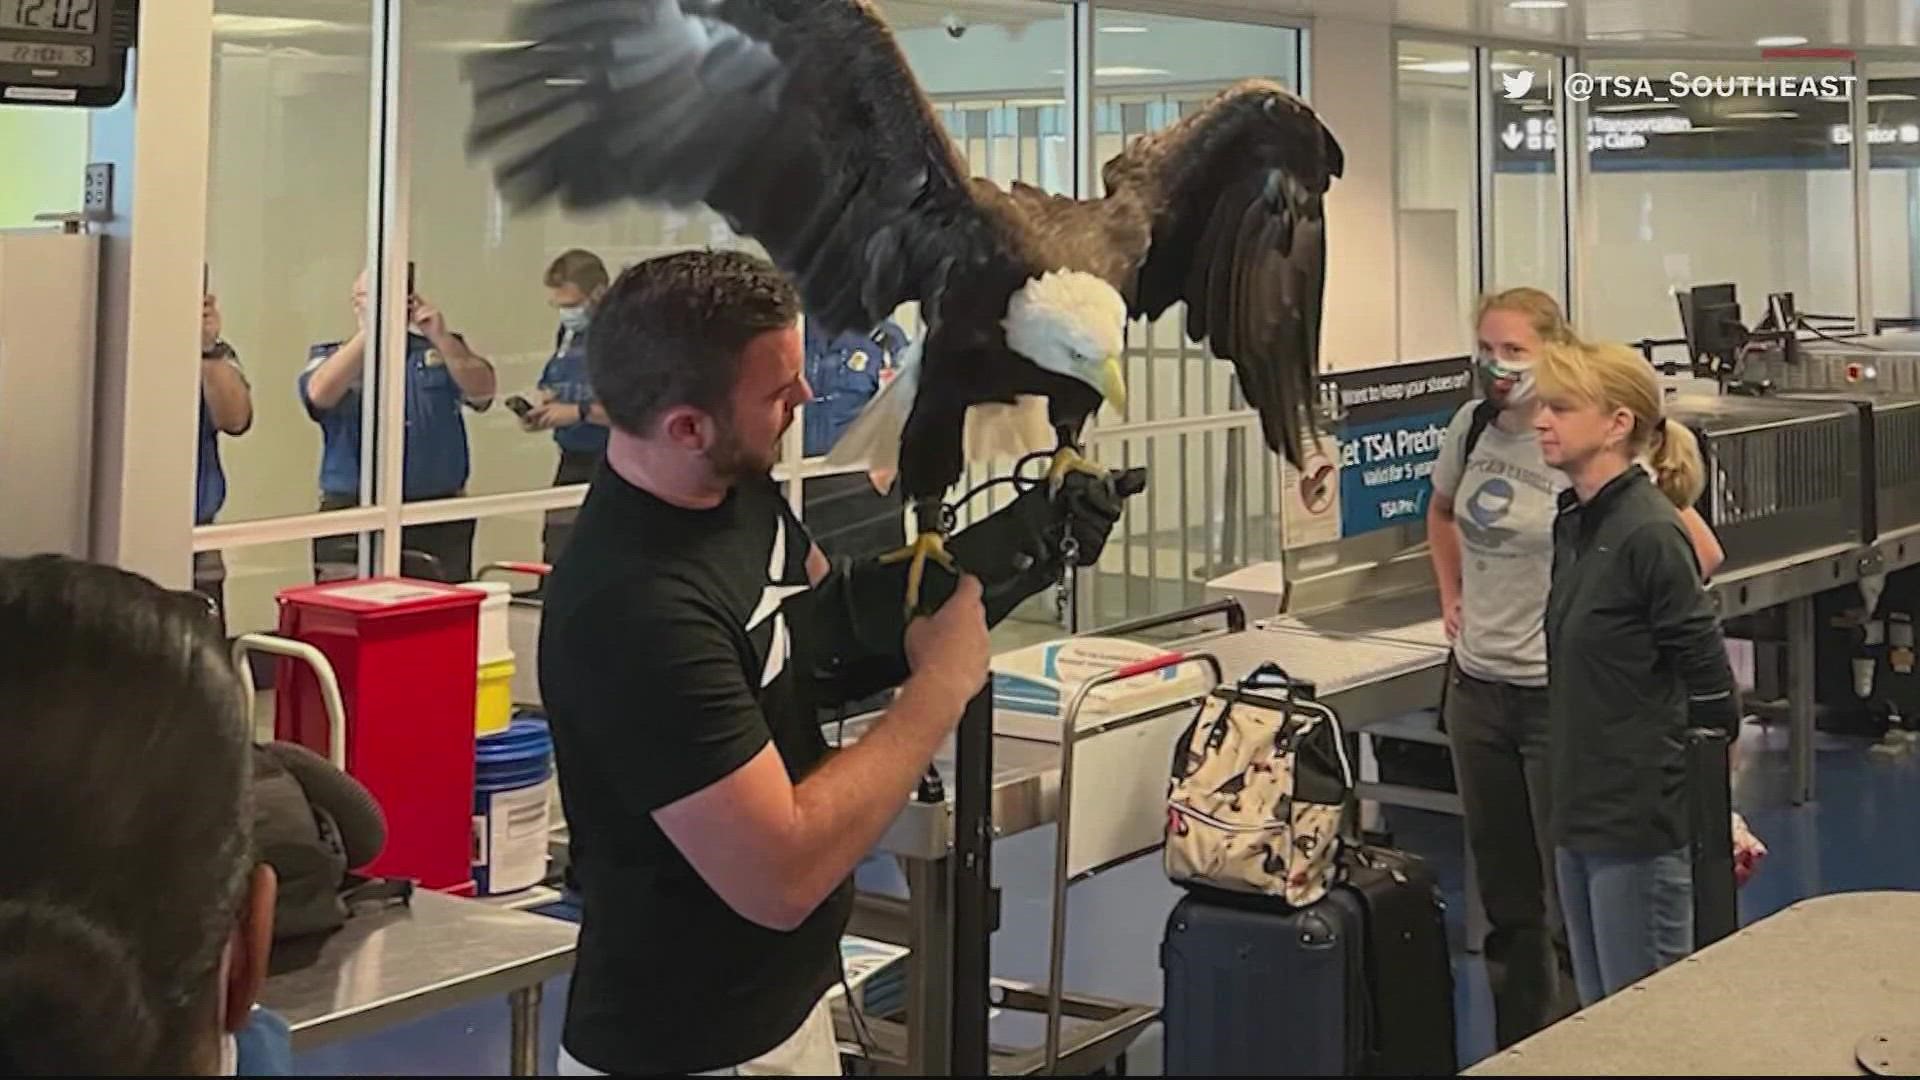 A bald eagle at Charlotte Douglas Airport!
His name is Clark.